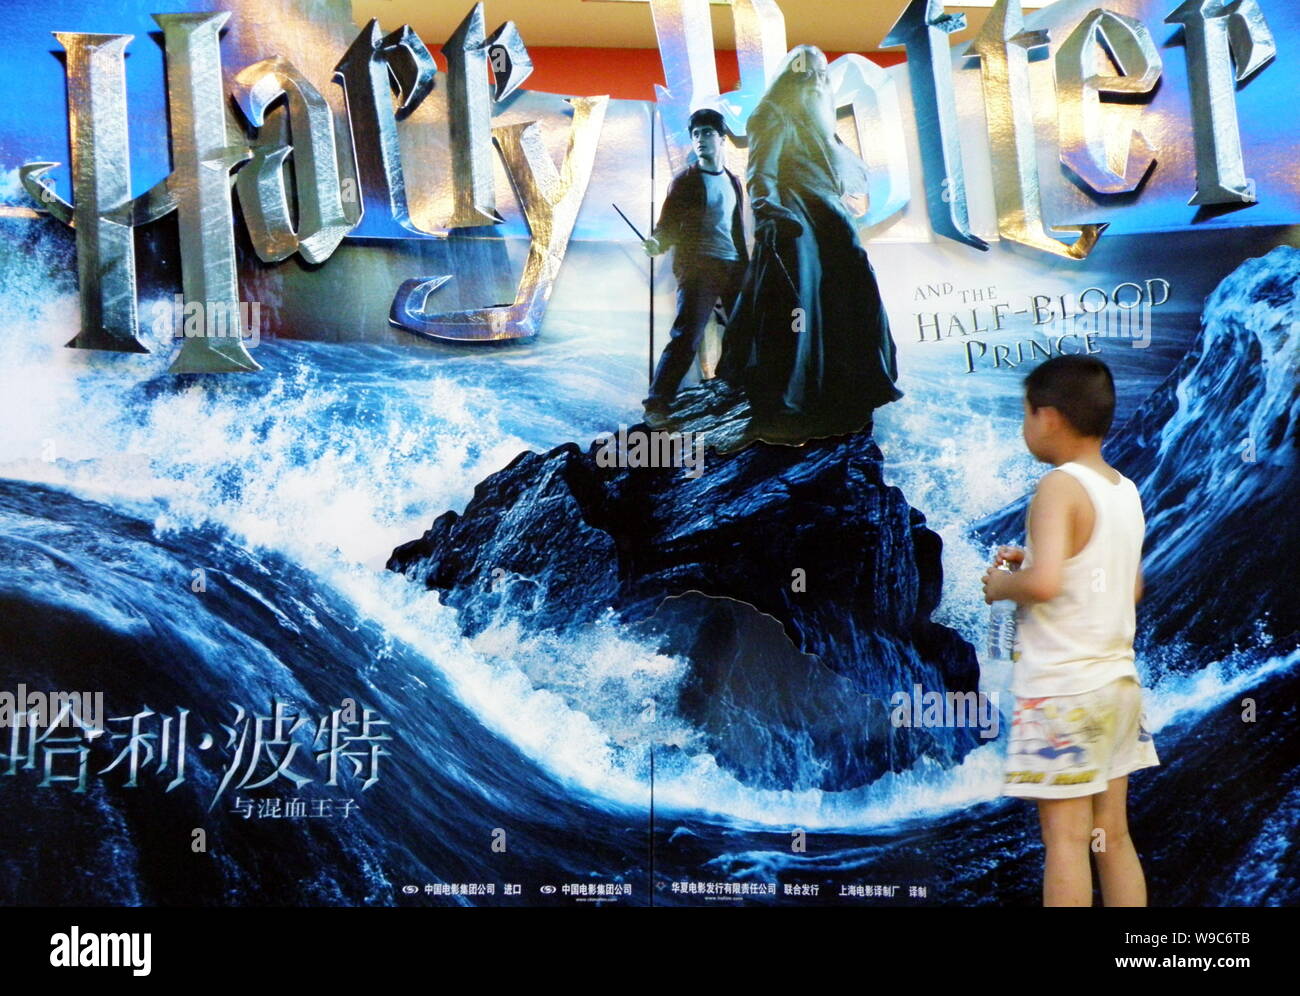 A Chinese child looks at a poster of the film Harry Potter and the Half-Blood Prince at a cinema in Yichang city, central Chinas Hubei province, 13 Ju Stock Photo